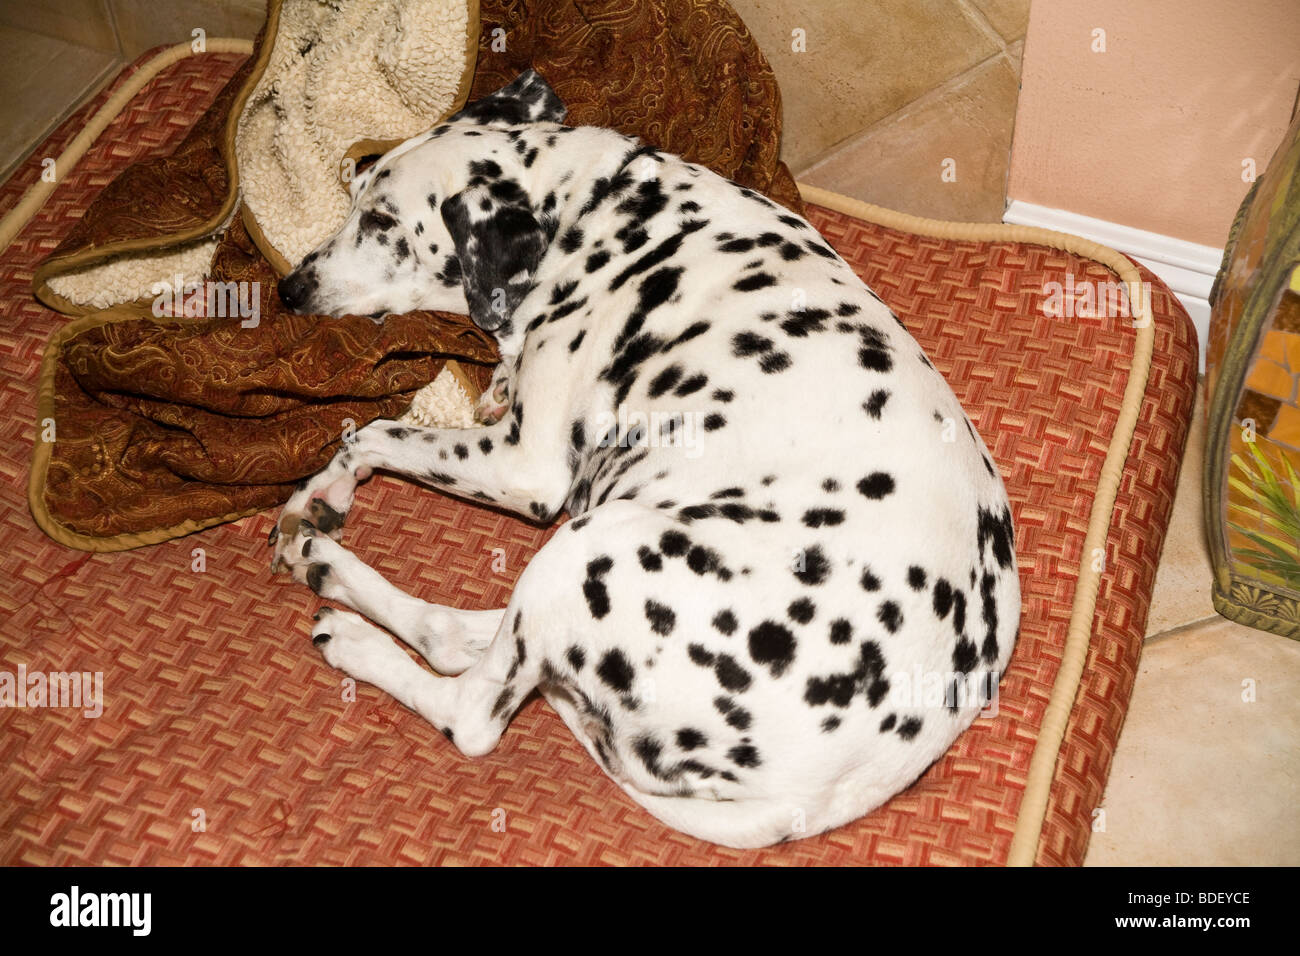 Dalmatian dog asleep napping on cushion in home.  top view above MR Stock Photo